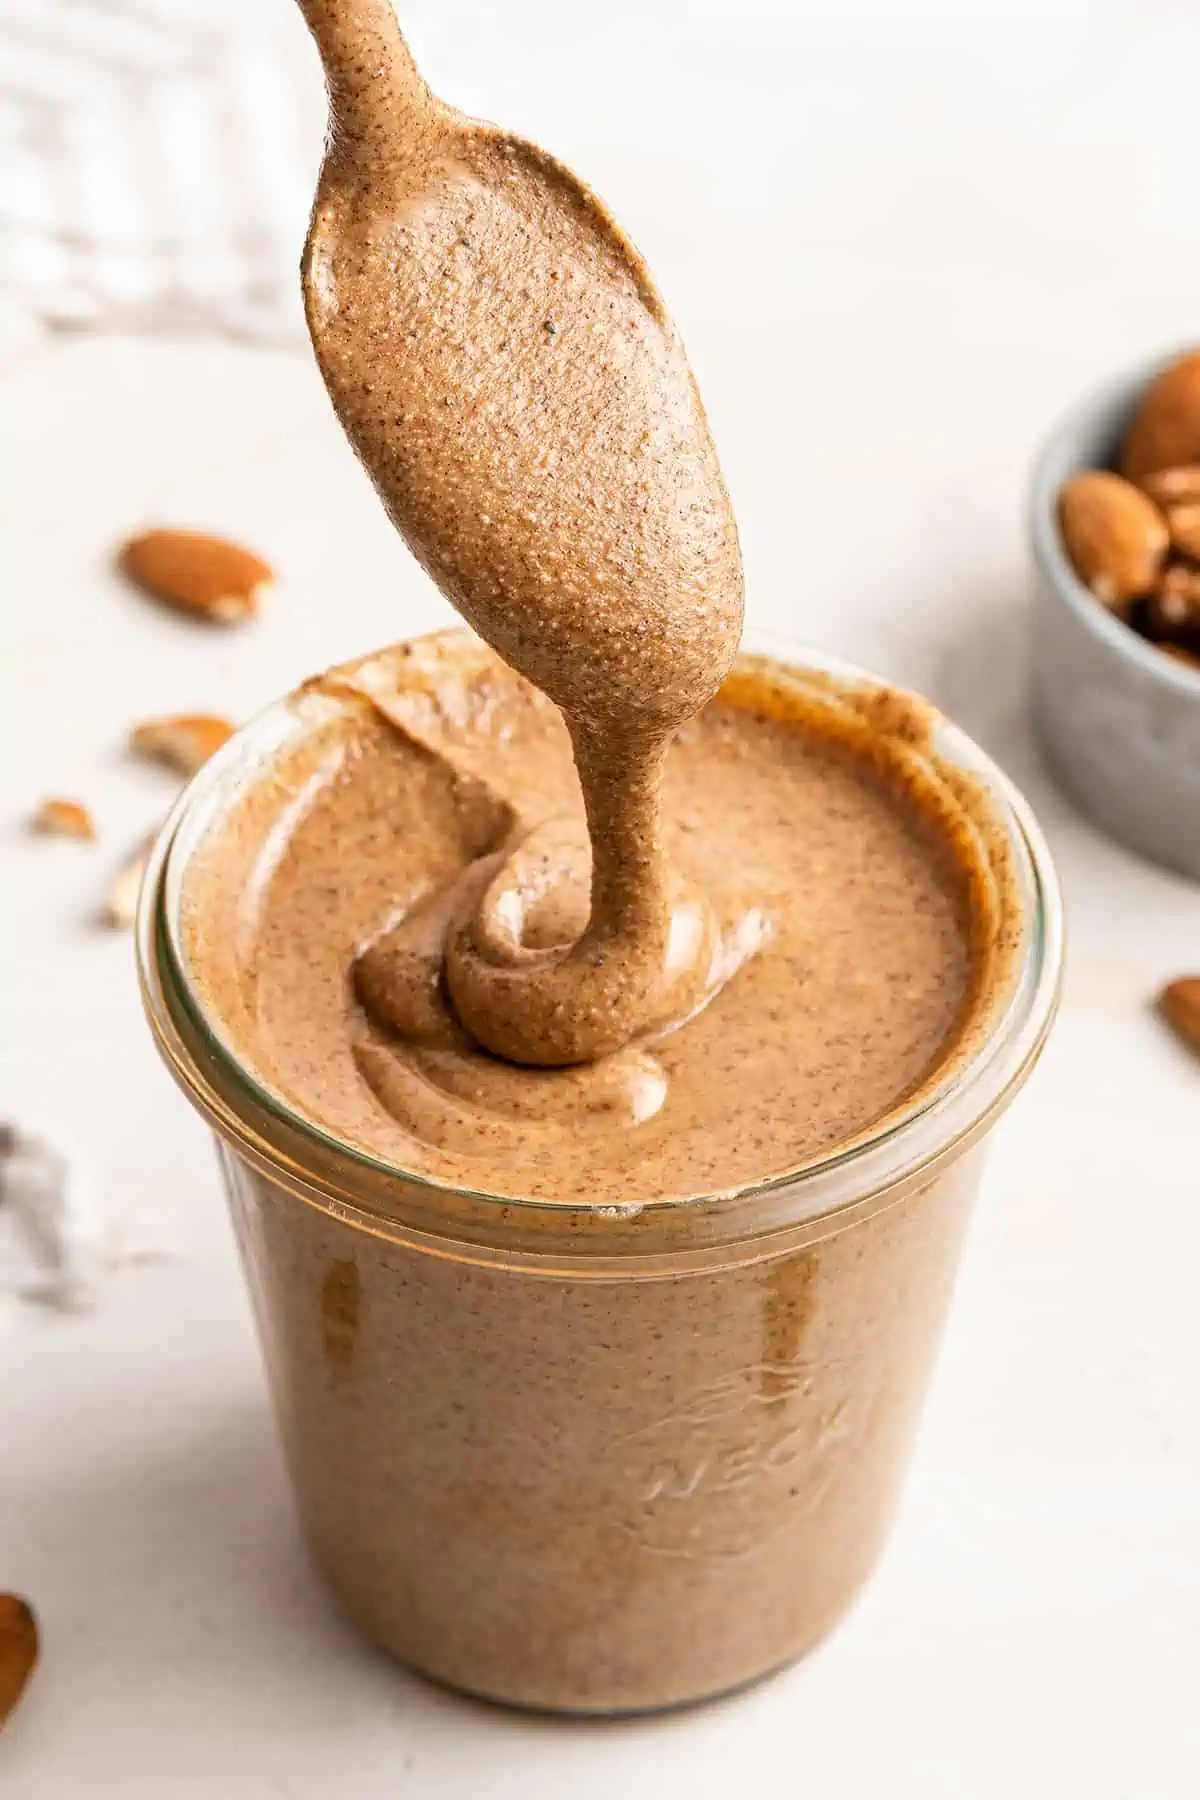 A spoonful of pumpkin spice almond butter drizzling the almond butter into a full jar of it, with a bowl of almonds in the background